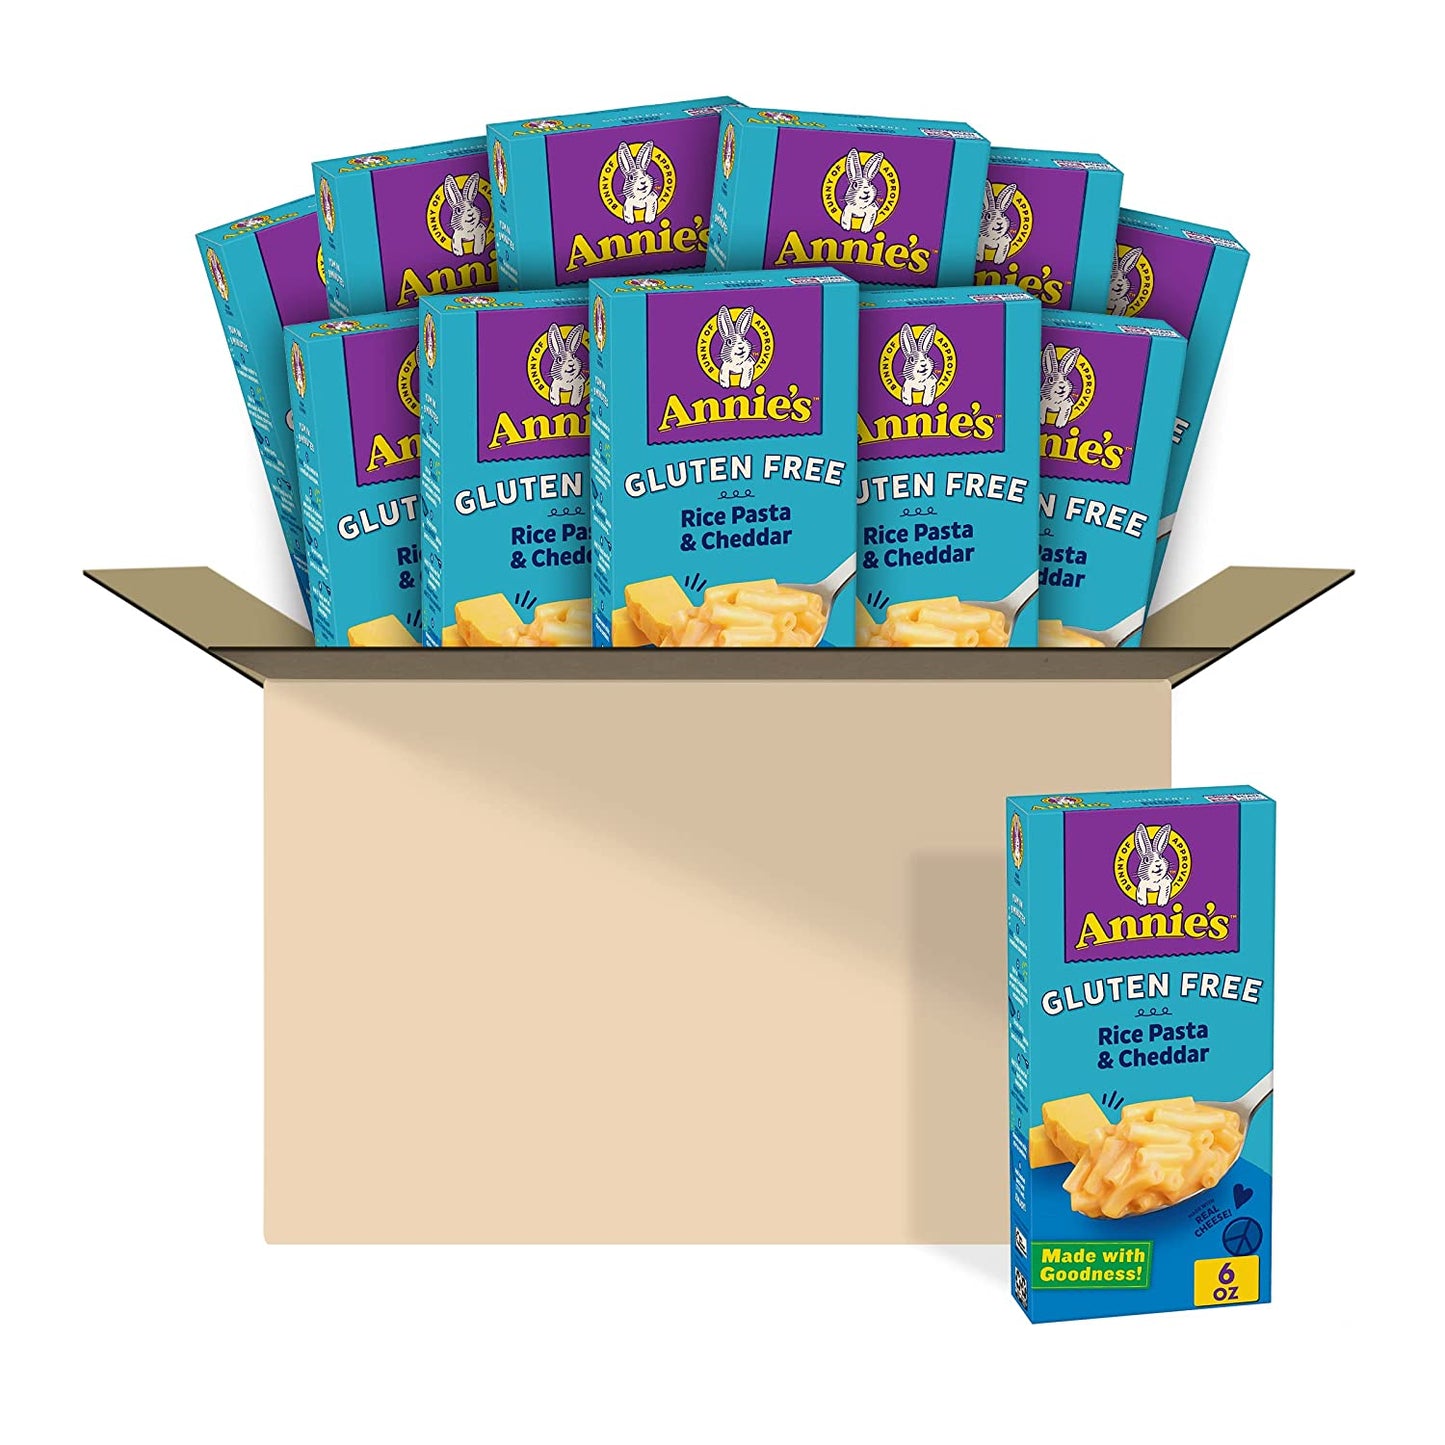 Annie's Gluten Free Macaroni and Cheese, Rice Pasta and Cheddar, 6 oz (Pack of 12) - Wholesale